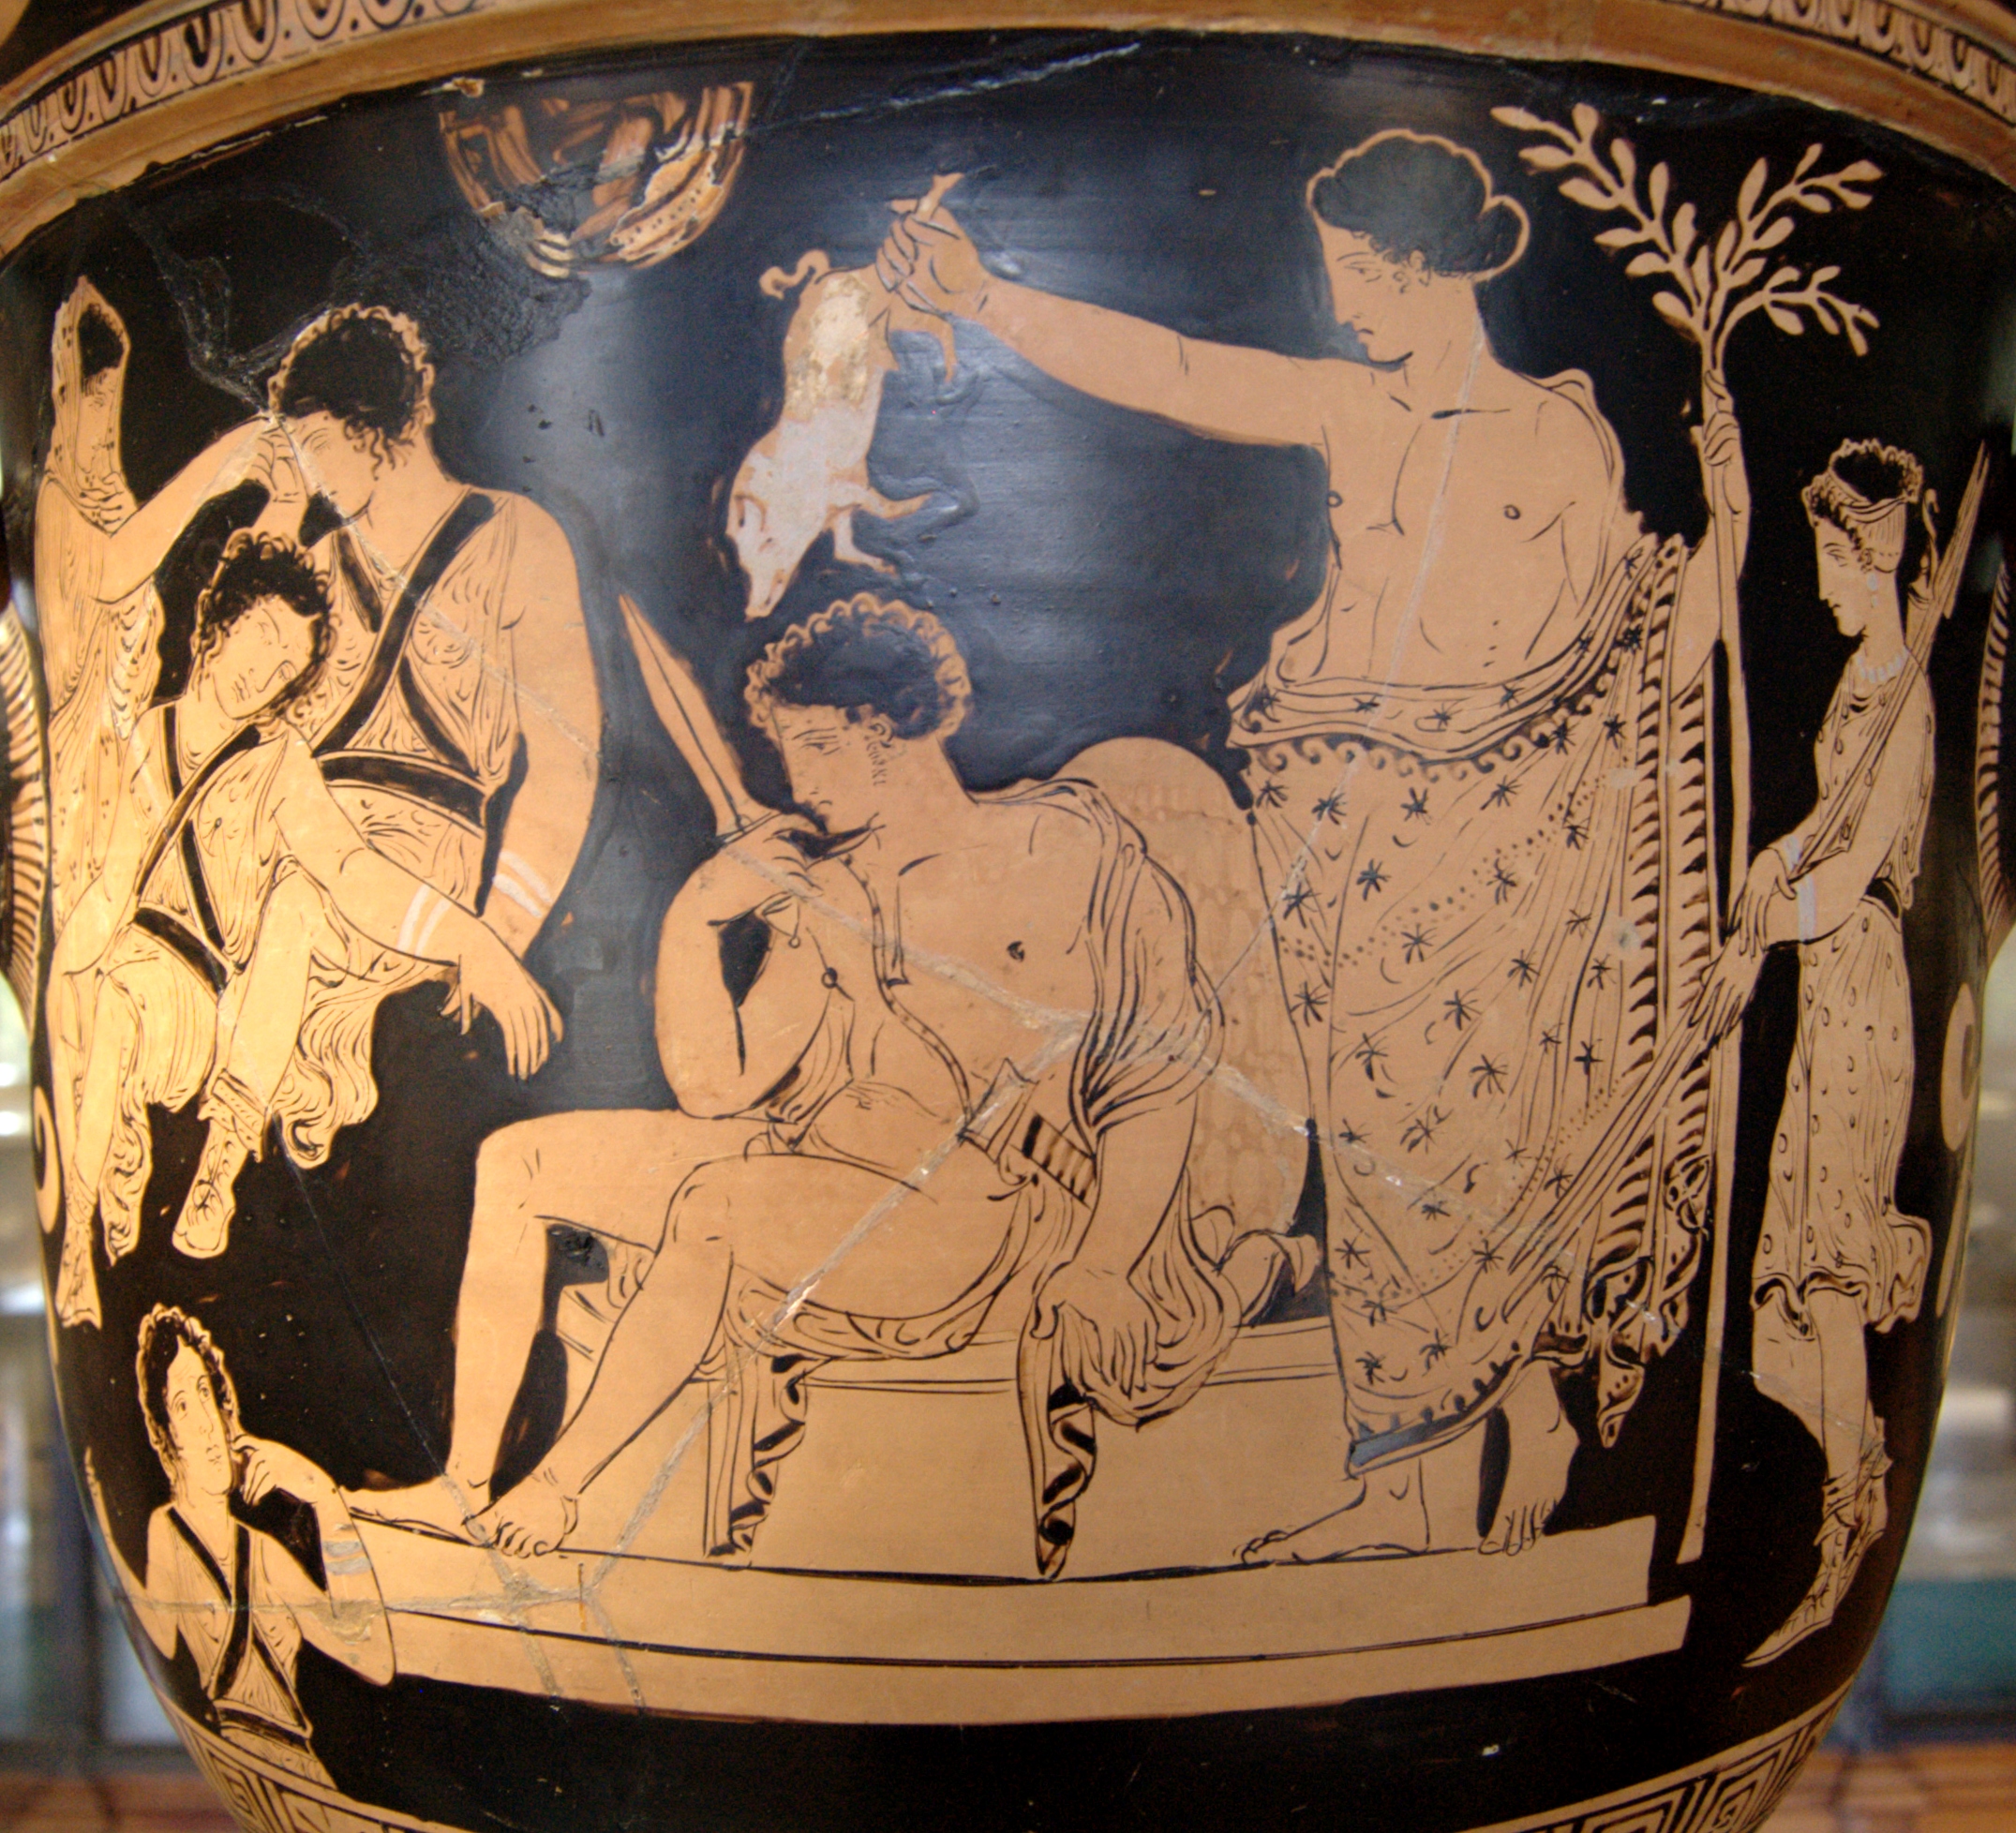 Orestes, nude with chlamys cape and holding a knife, sits on an altar. Apollo, draped in a patterned himation, stands behind him holding a branch in one hand and a piglet over Orestes' head in the other. A young woman in a tunic stands behind Apollo. To the left, the three Furies, young women in tunics, sleep. Clytemnestra, veiled, sits beside them.